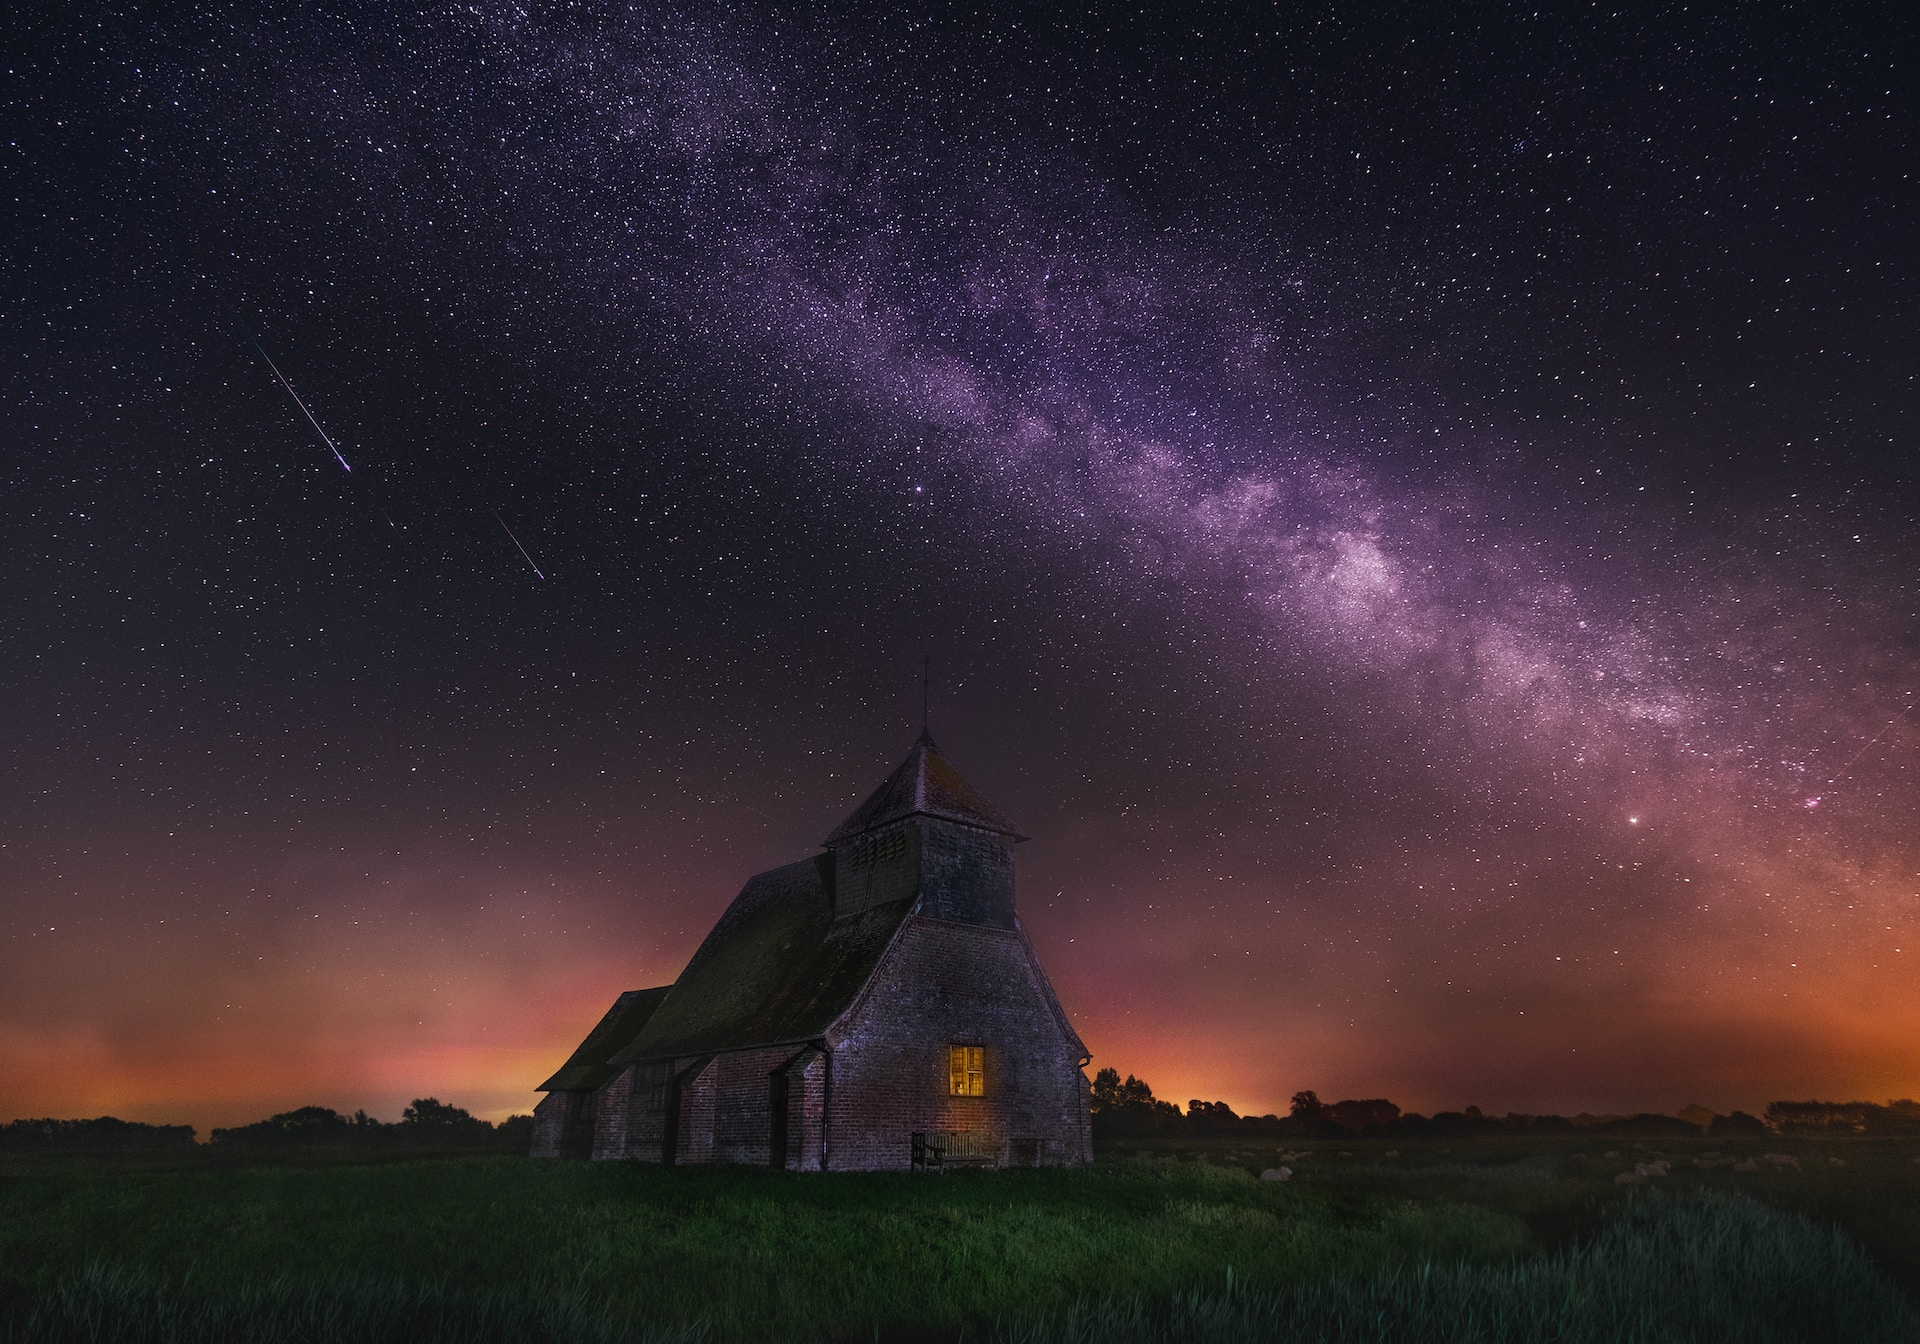 Milky Way photographed over a church in Canterbury, United Kingdom - a best place to see the Milky Way 